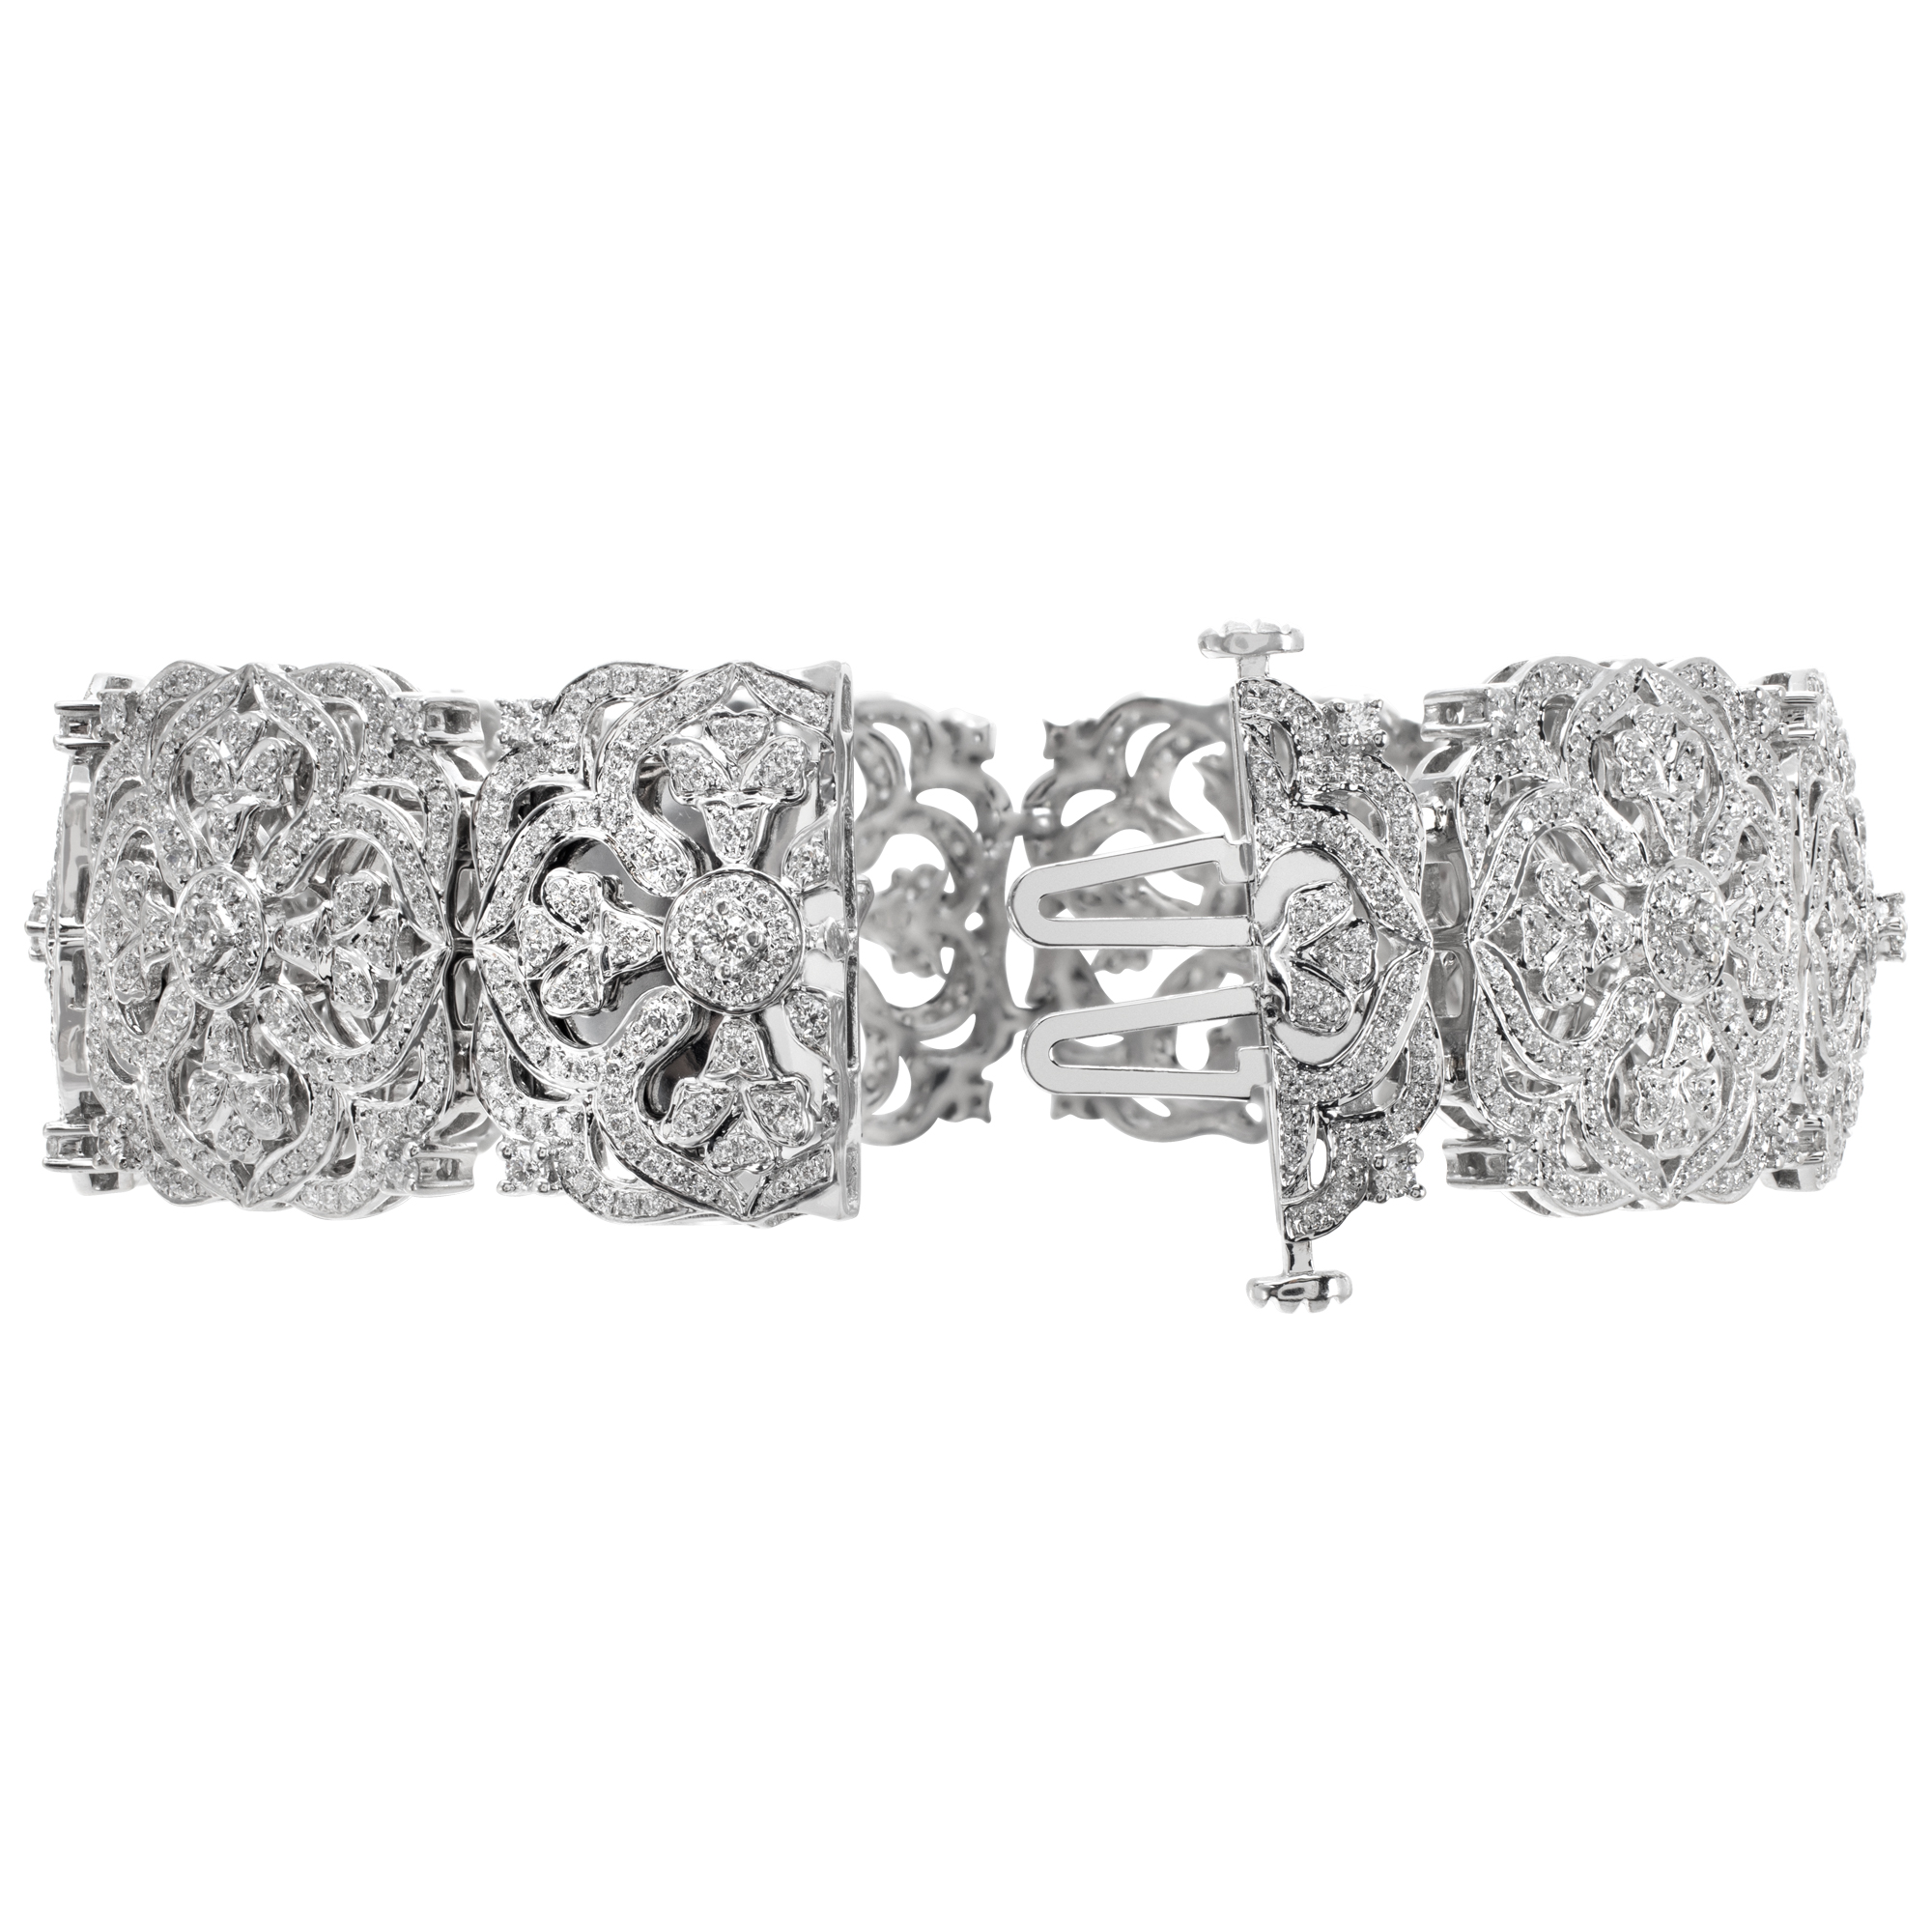 Charles Krypell diamond pave floral amulet bracelet in 18k white gold with approximately 9 carats in G-H, VS diamonds image 4